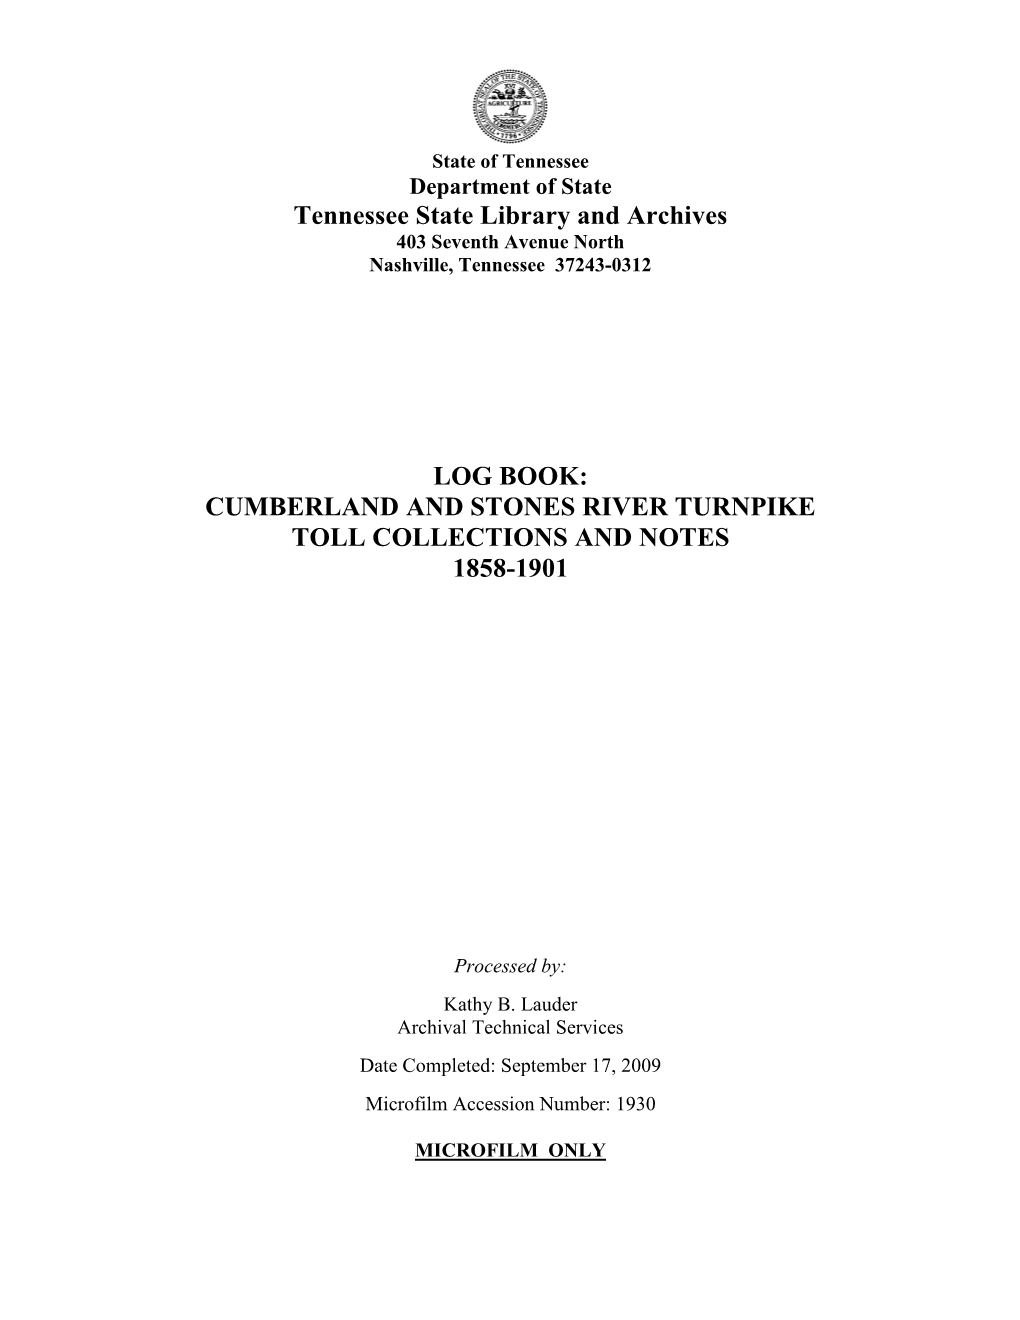 Log Book: Cumberland and Stones River Turnpike Toll Collections and Notes 1858-1901